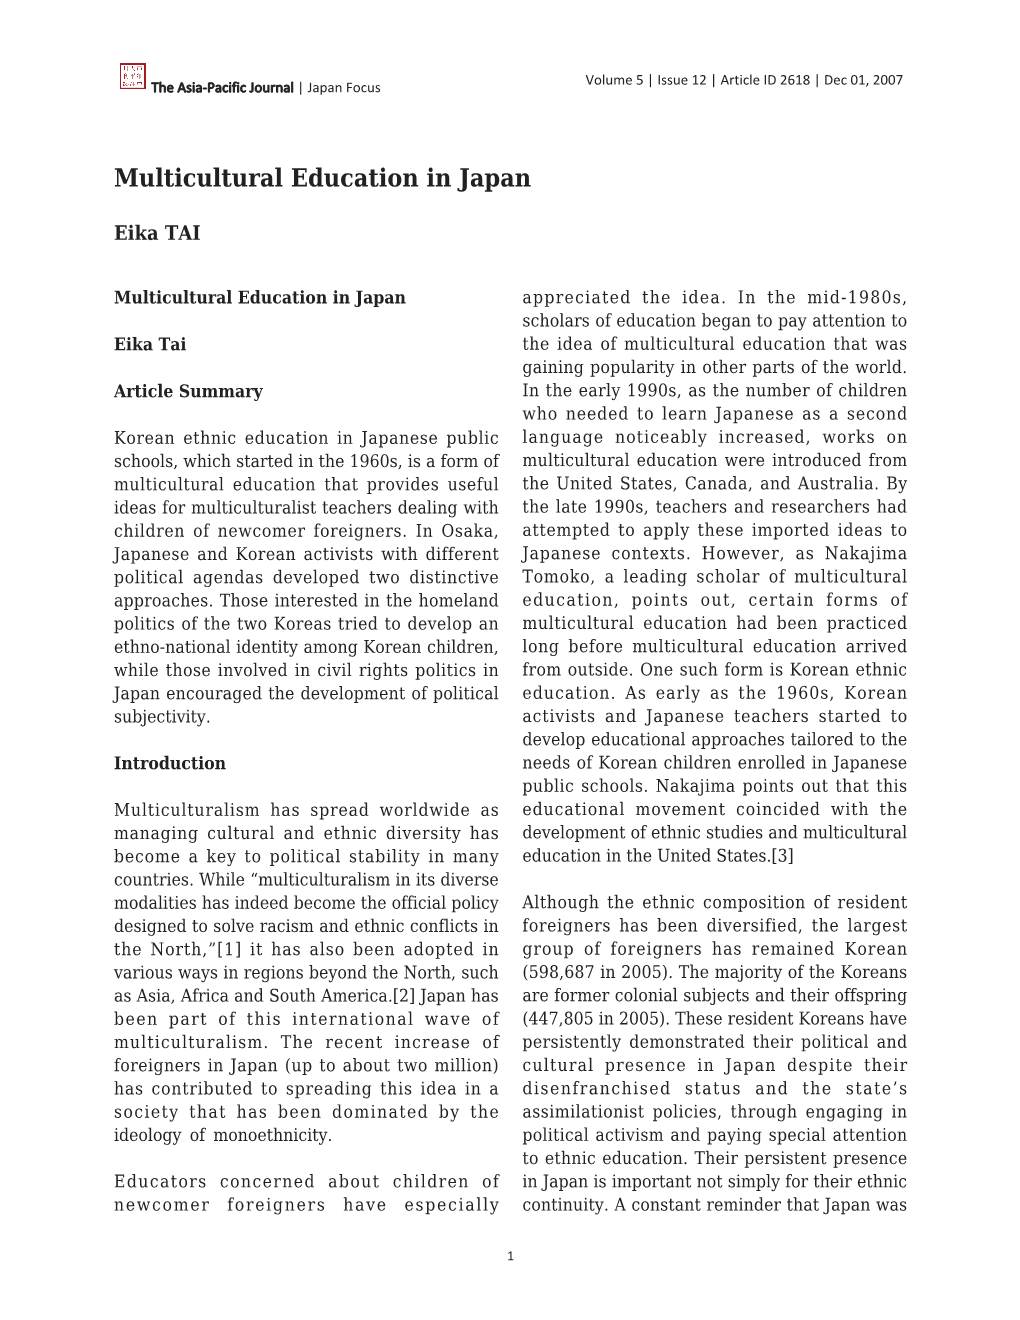 Multicultural Education in Japan